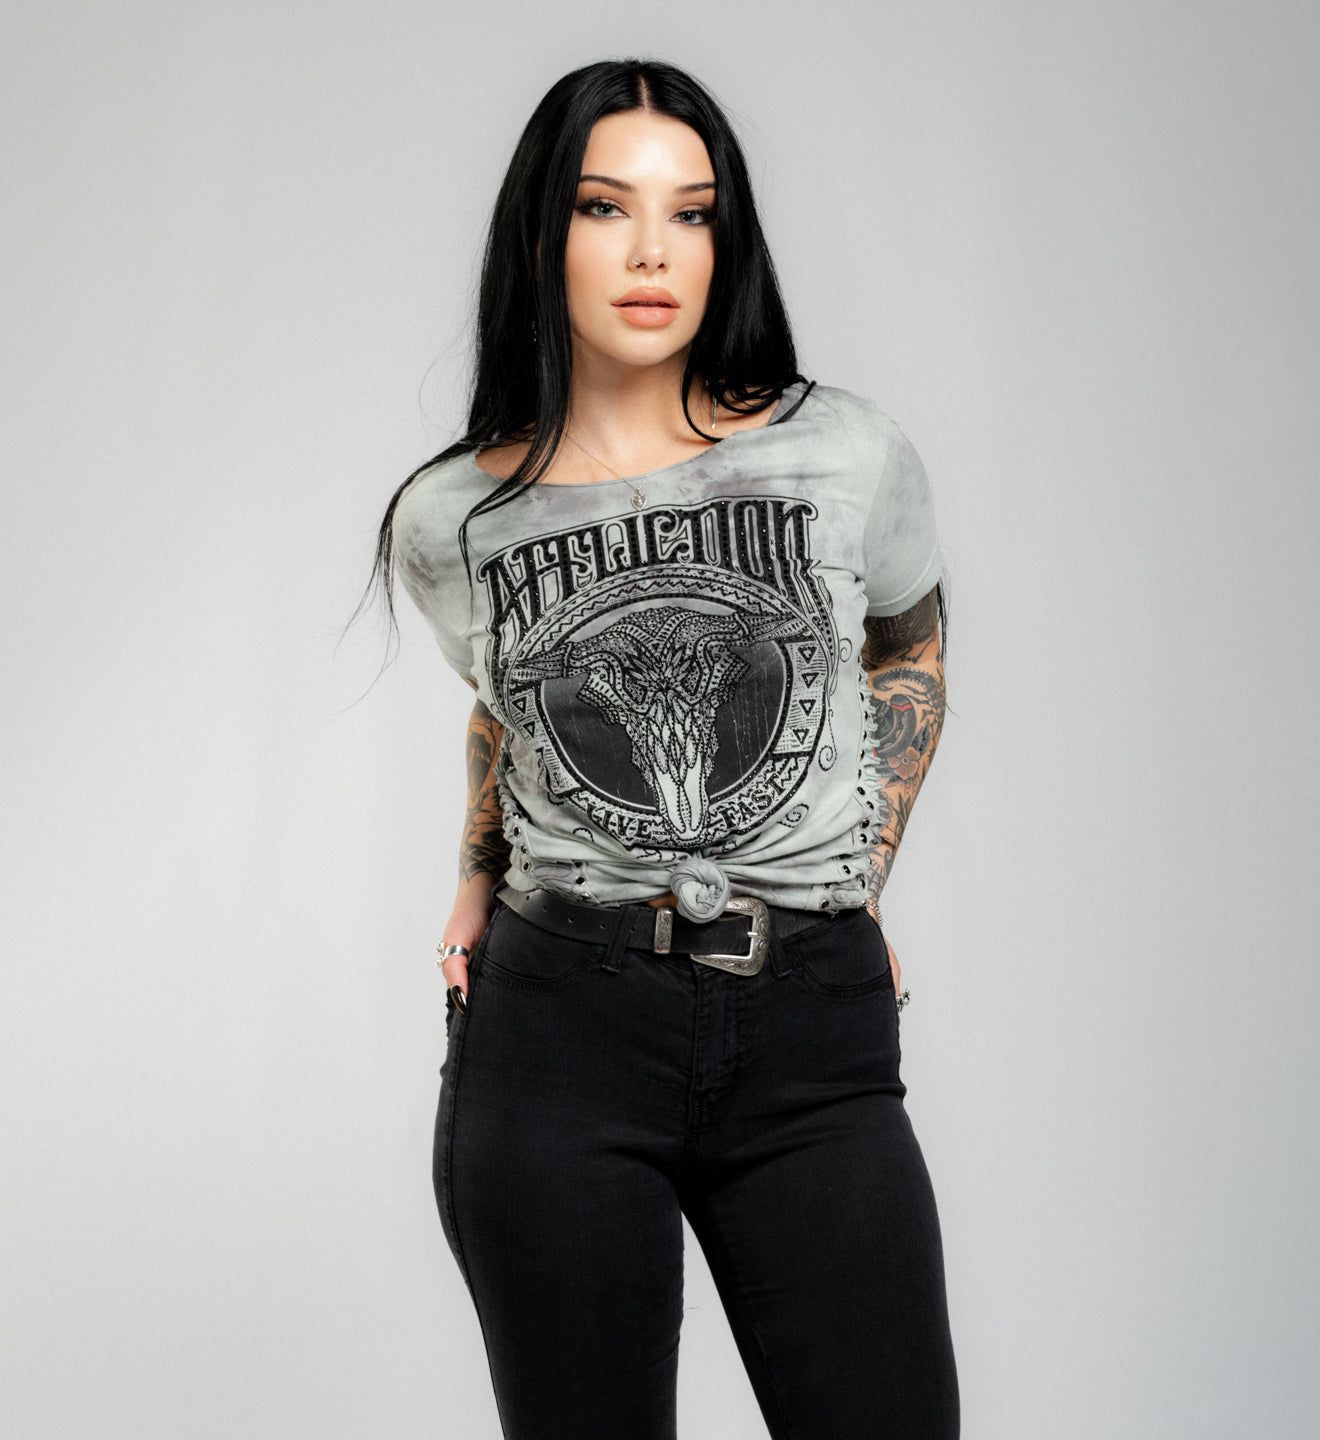 Roam Unknown - Affliction Clothing